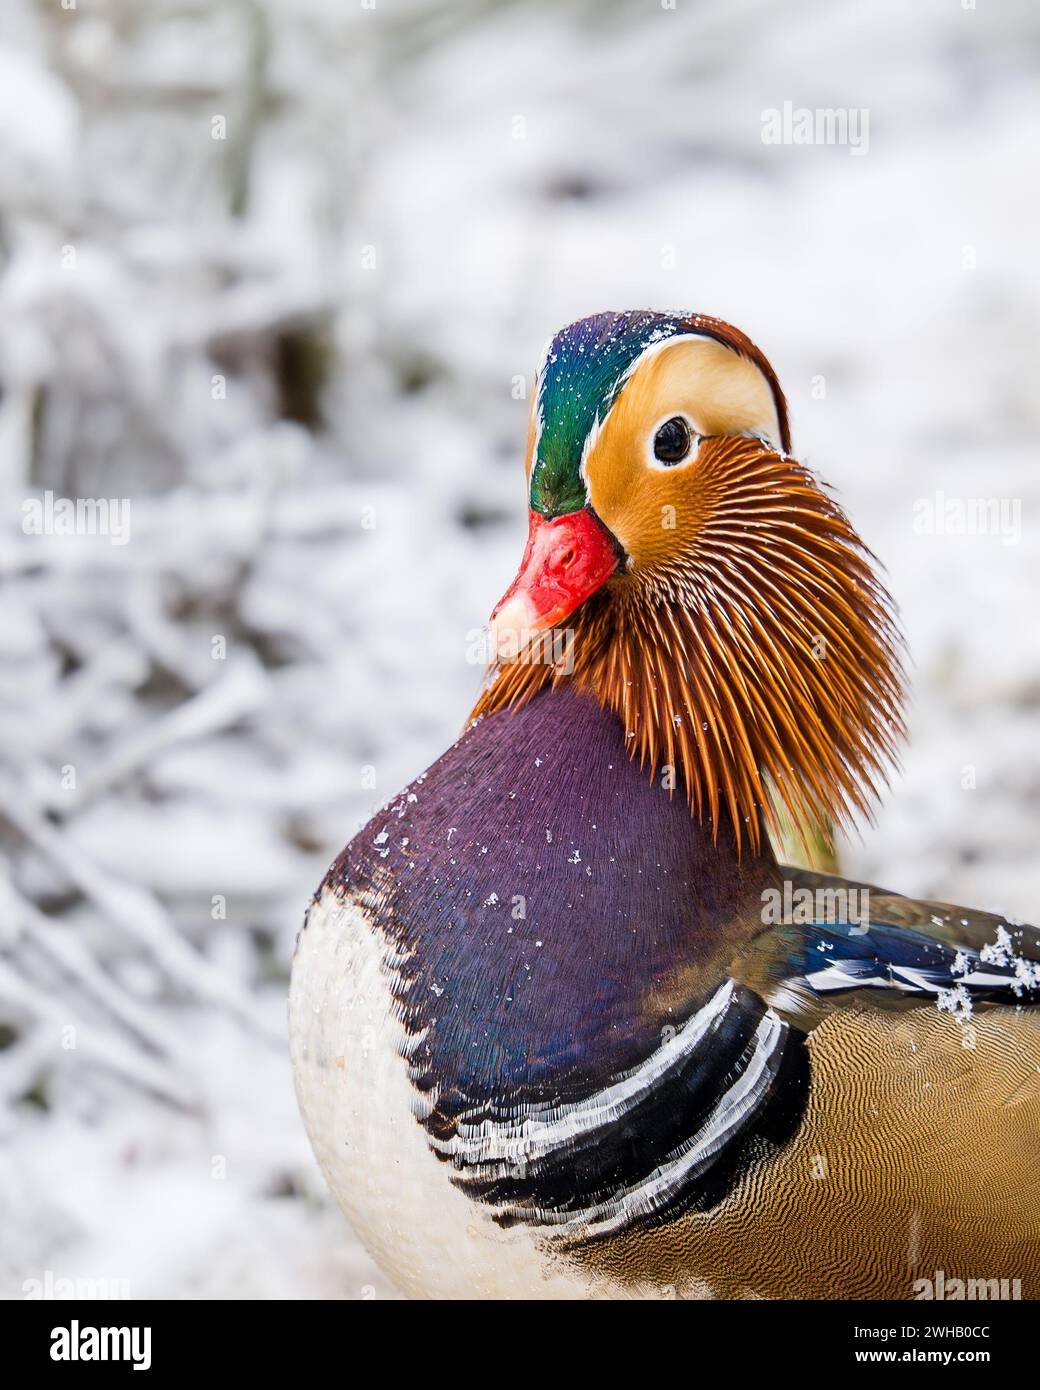 A colourful Mandarin duck (Aix galericulata) portrait in the snow with specks of ice and snowflakes on its colorful feathers and body. Stock Photo